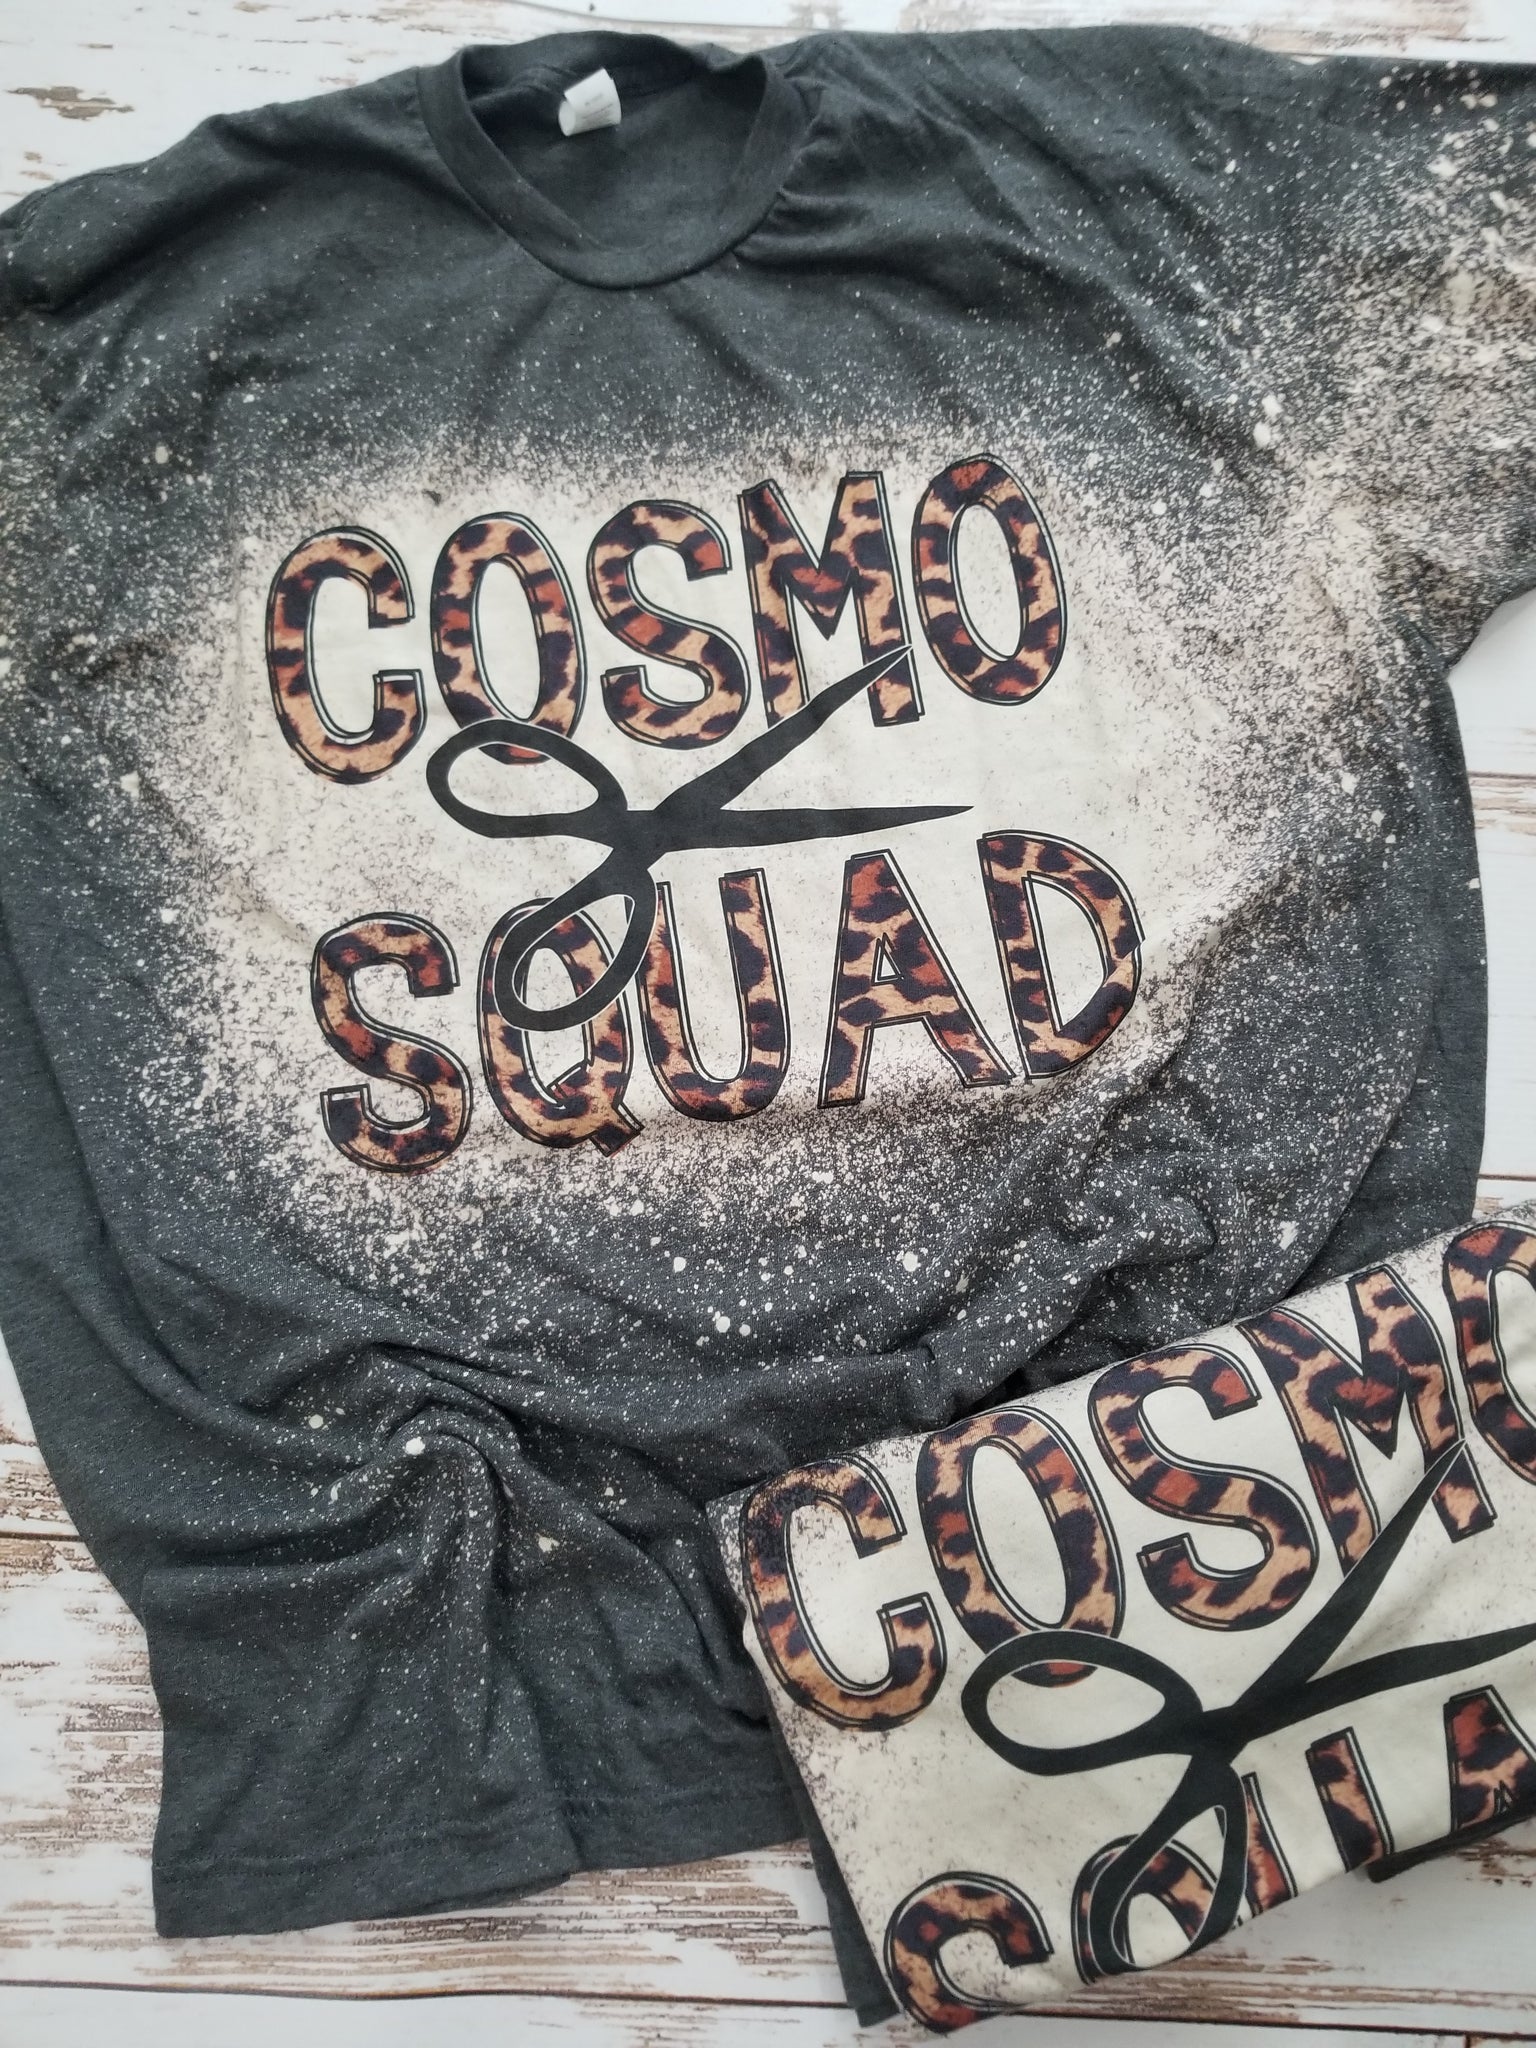 Cosmo Squard Charcoal bleached tee